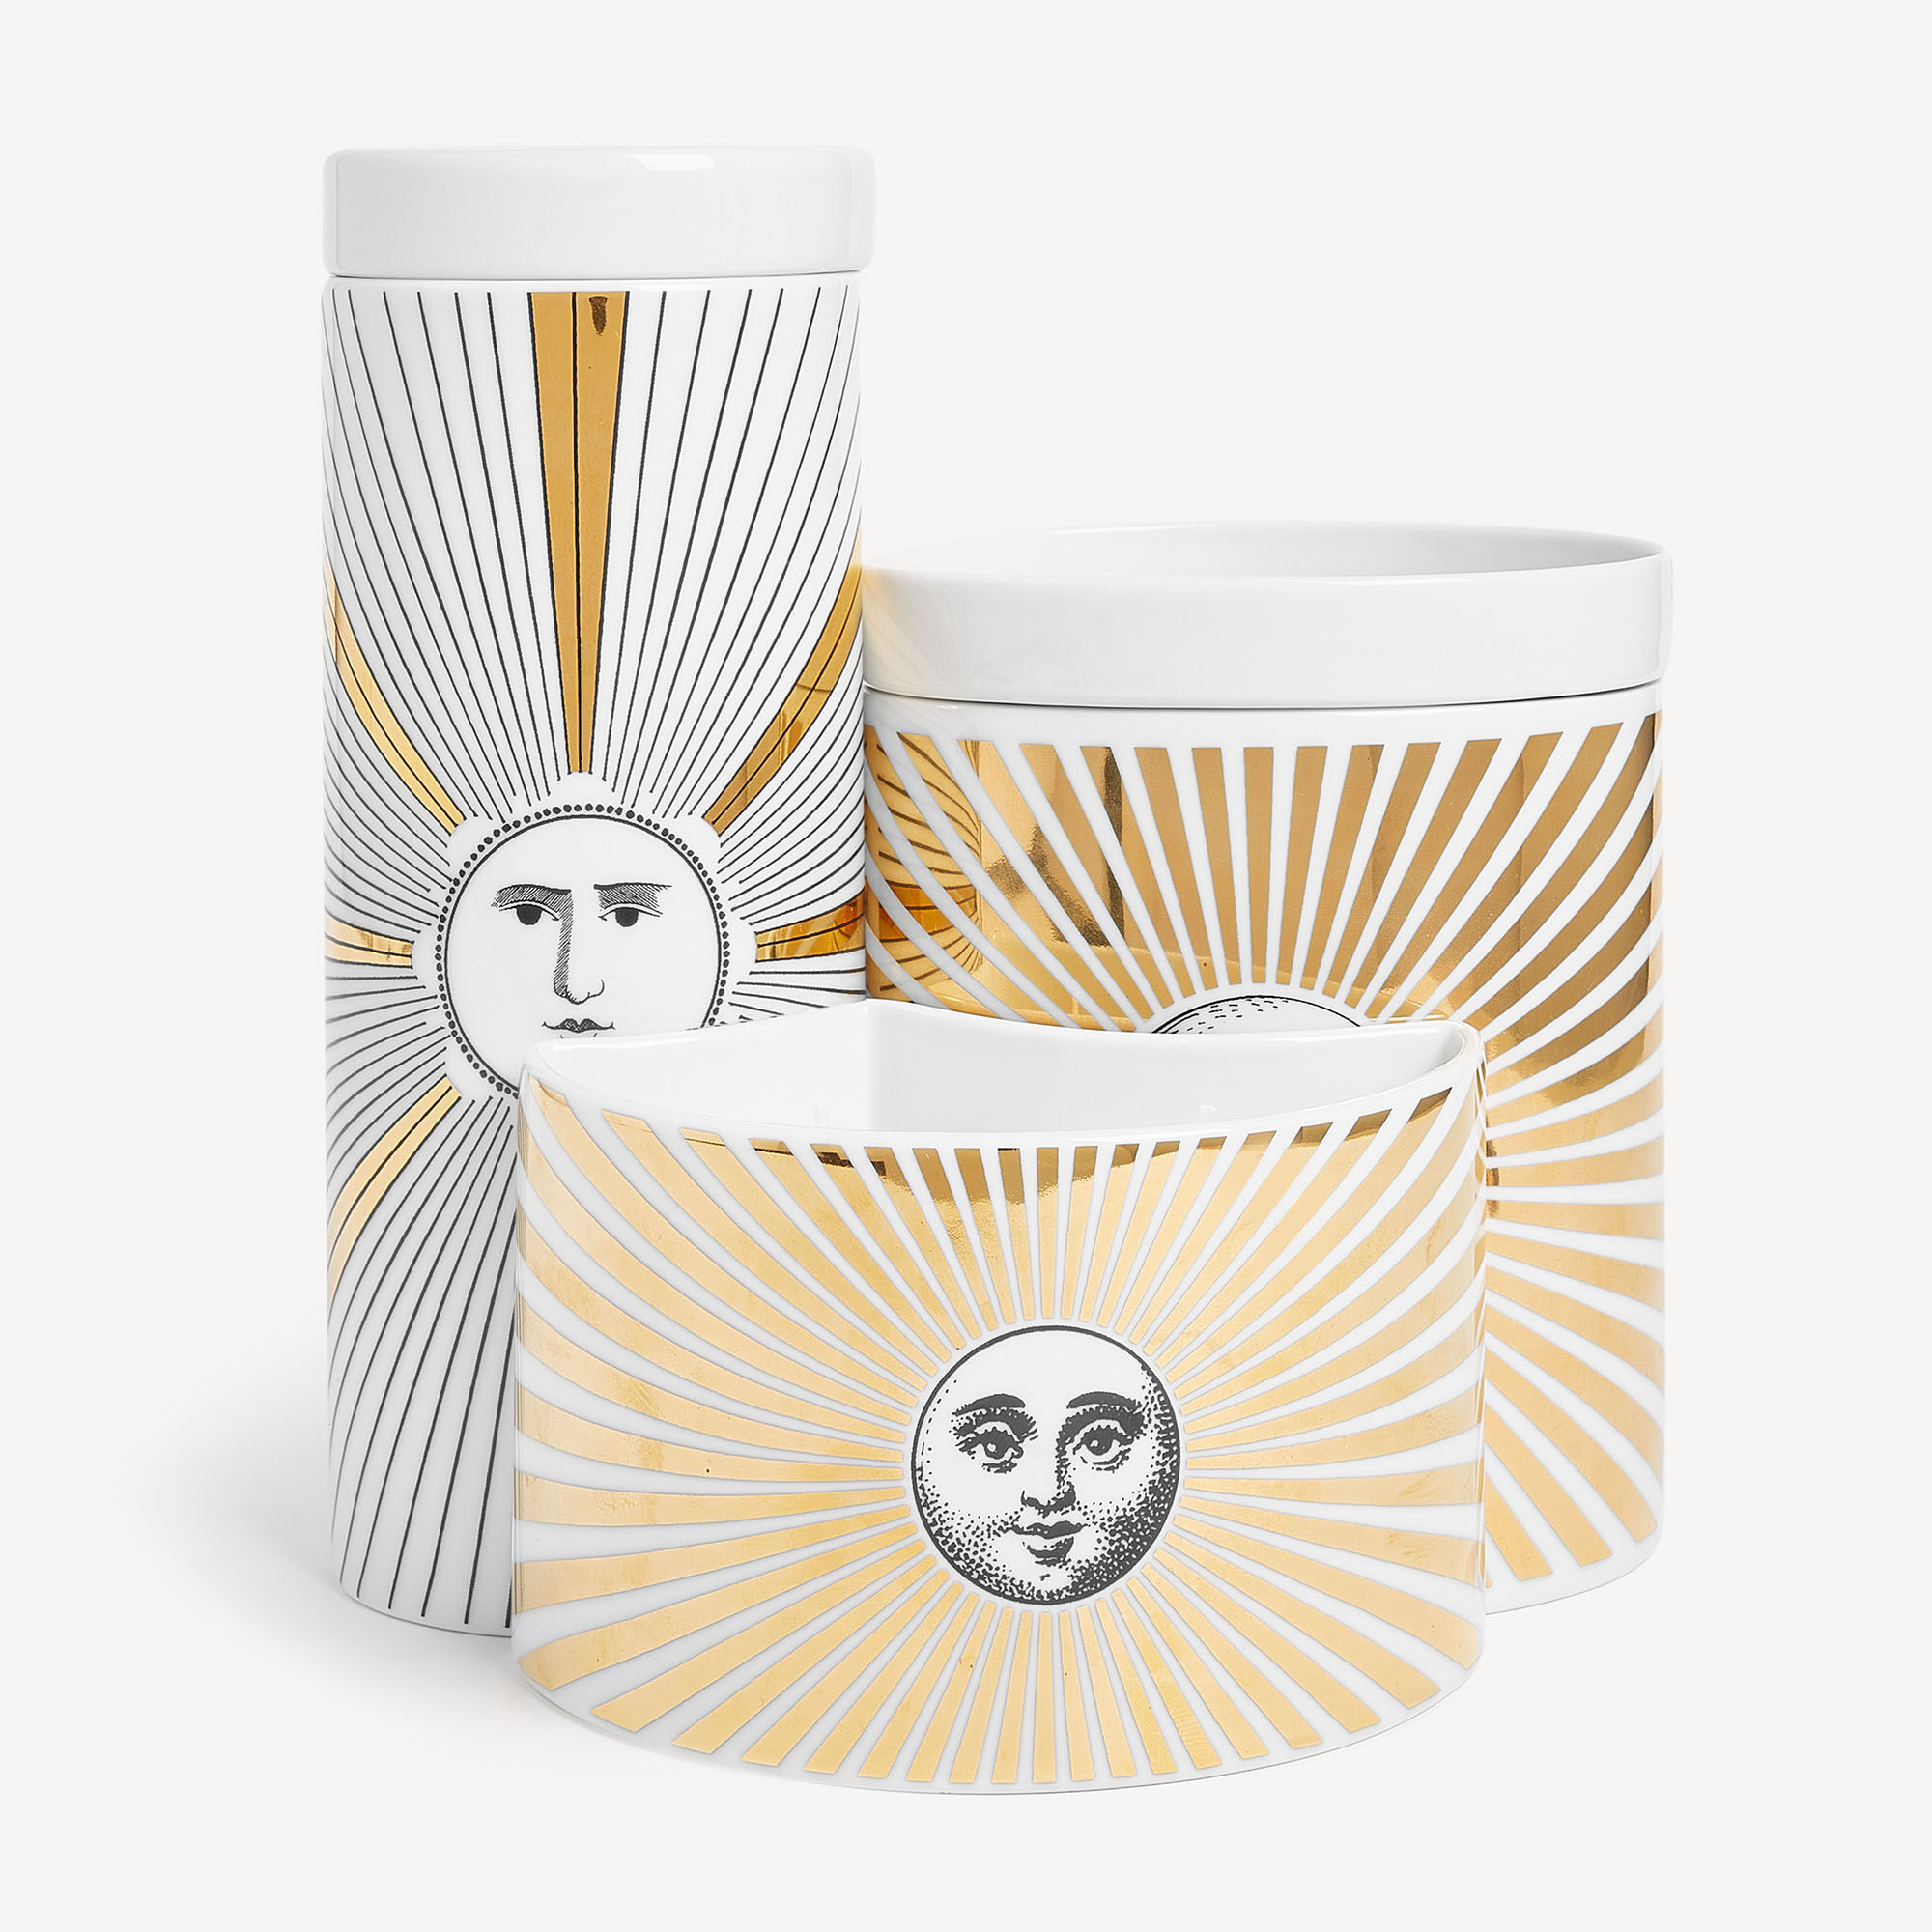 Luxury home perfumes and candles | Fornasetti® - NEL MENTRE Set of